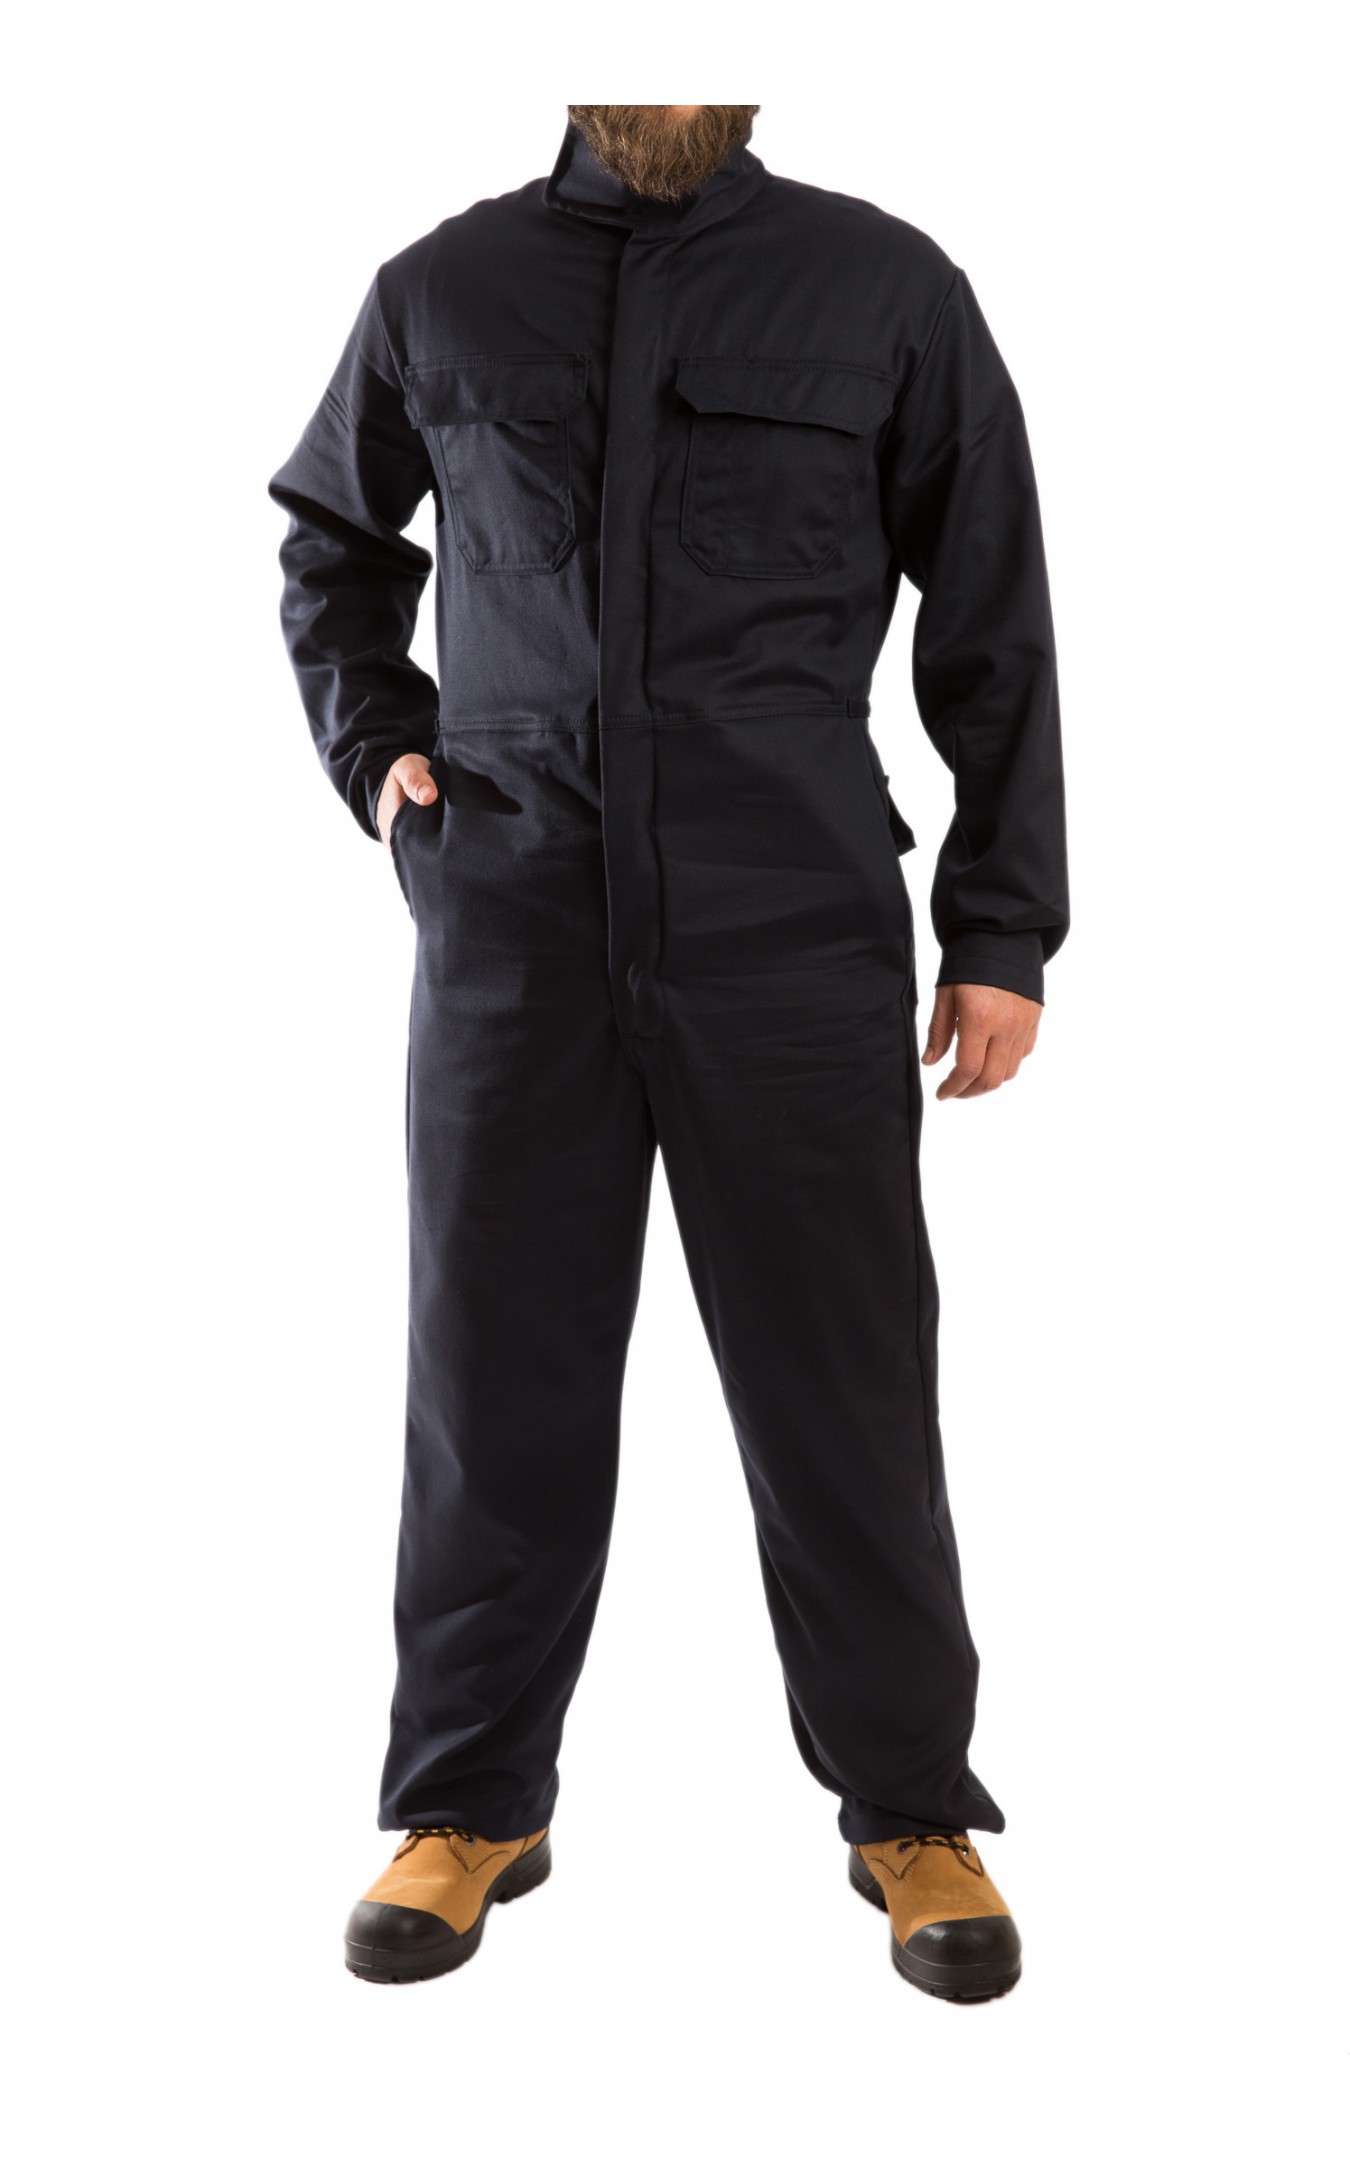 Welding F.R. Cotton Coverall - LH Workwear